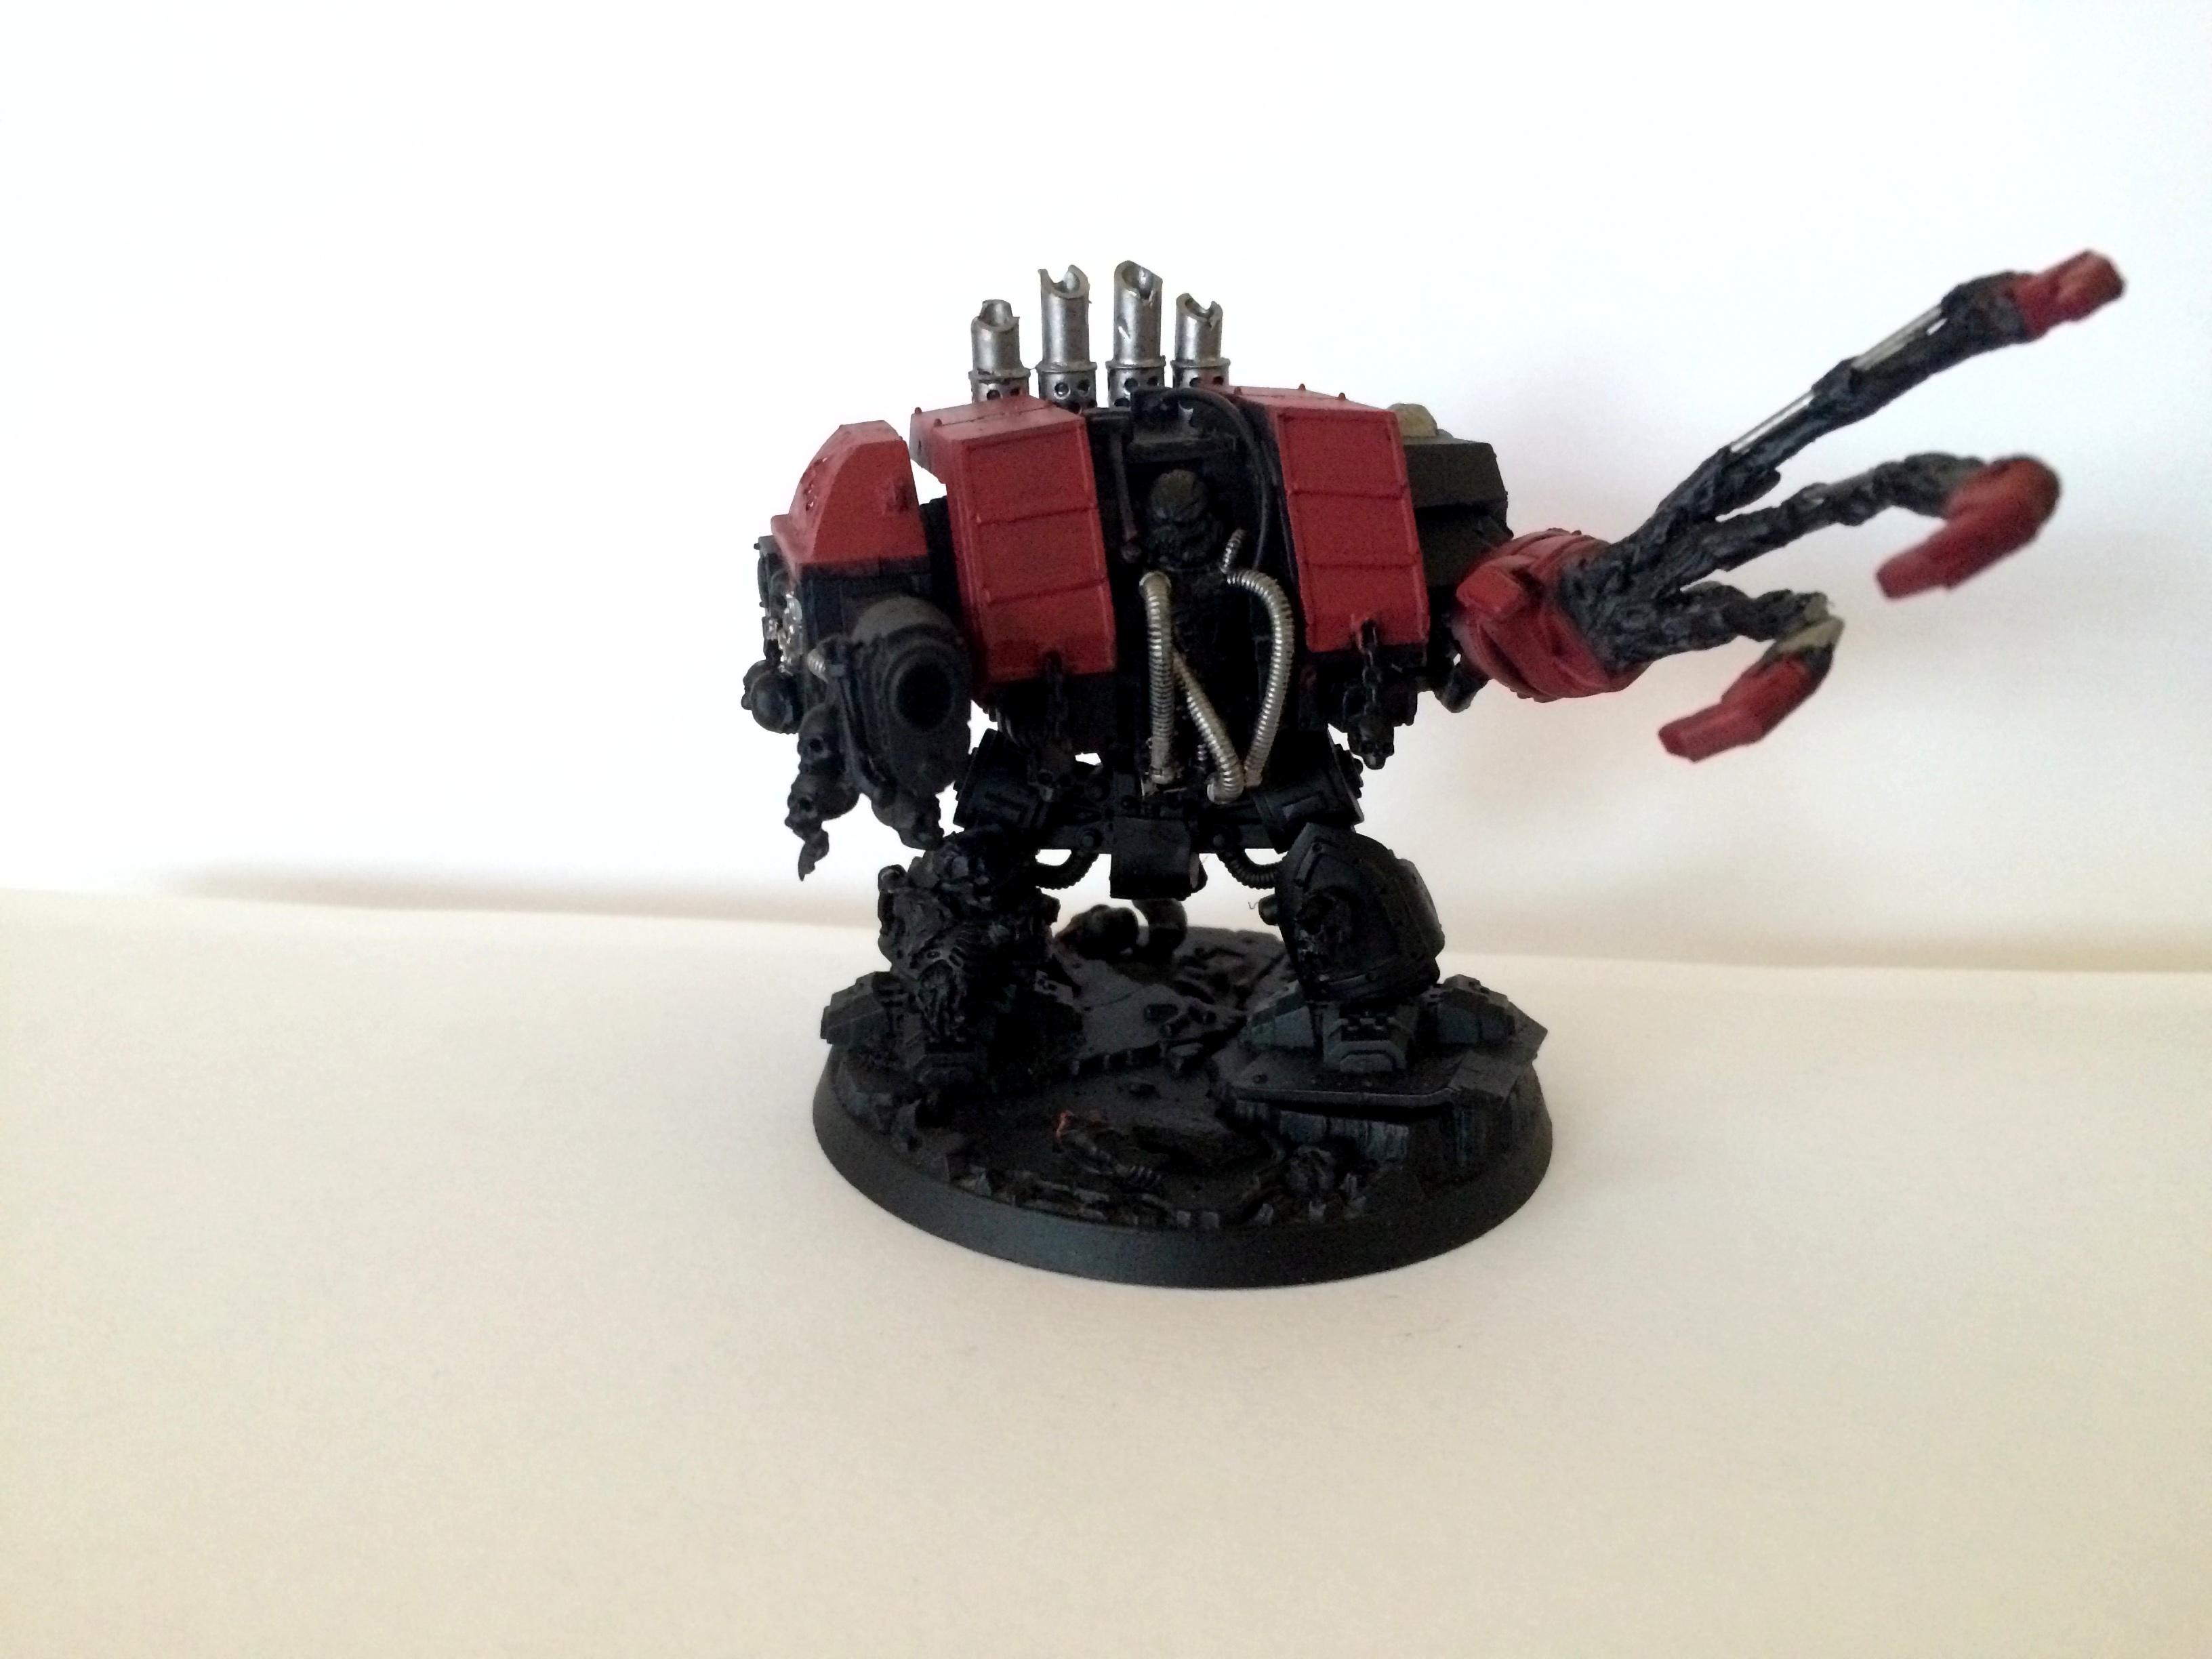 Cannon, Chaos, Conversion, Customised, Dreadnought, Helbrute, Old, Plasma, Scourge, Space, Space Marines, Venerable